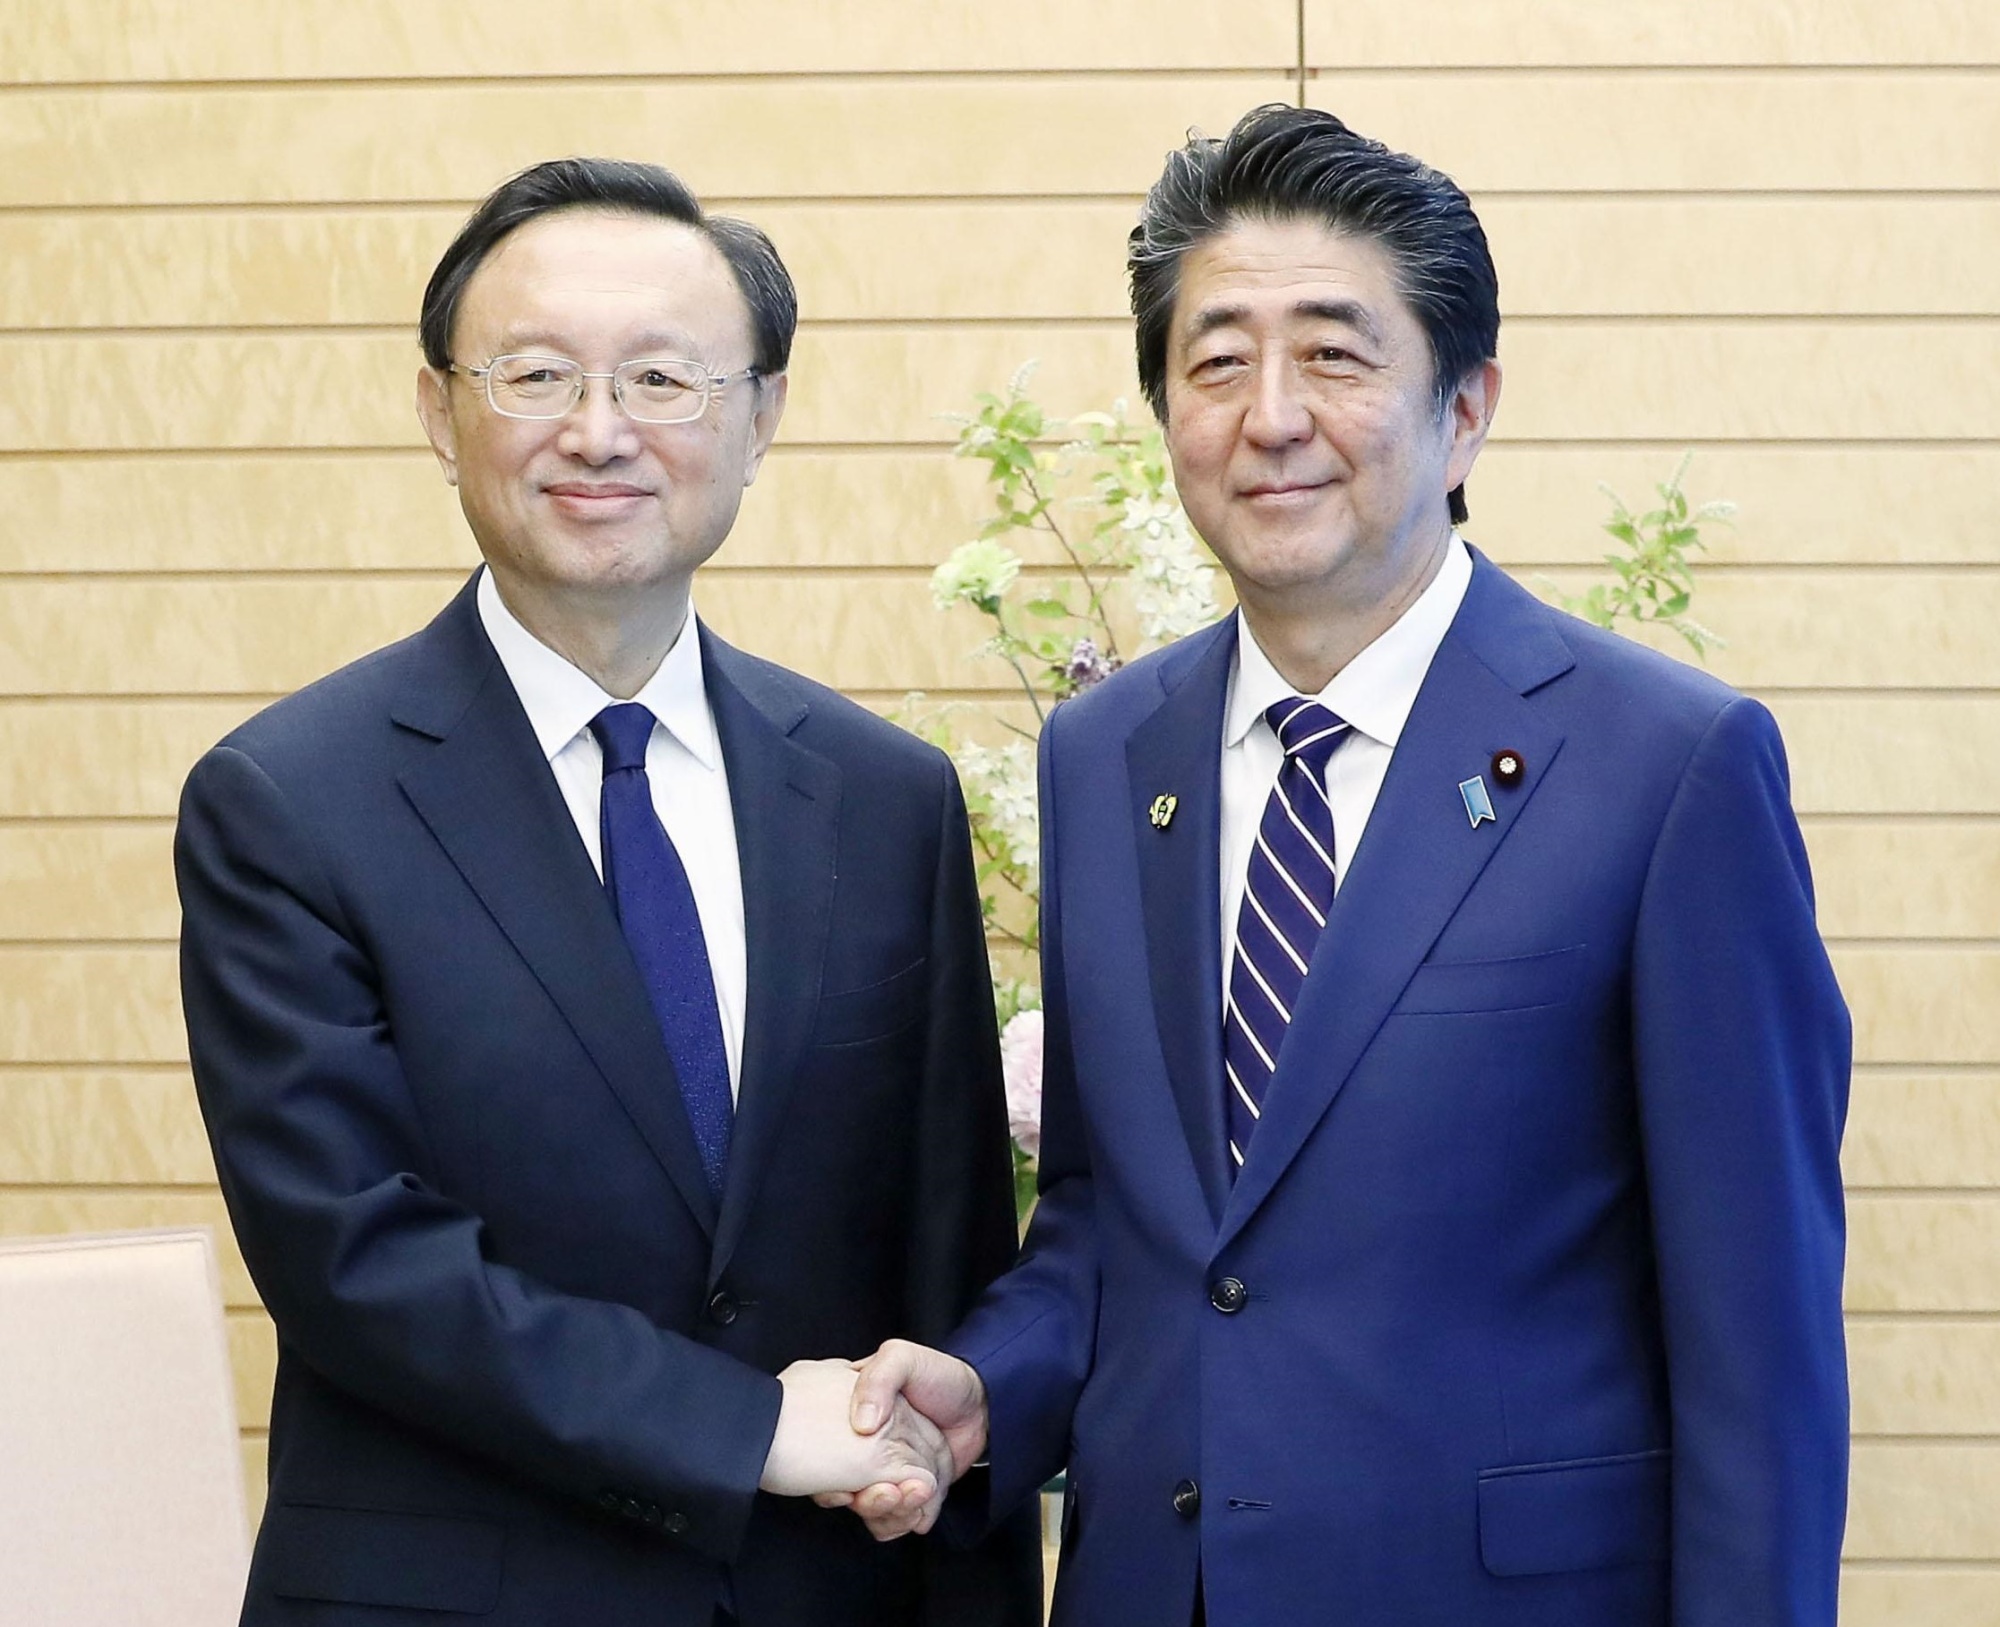 Prime Minister Shinzo Abe and high-ranking Chinese diplomat Yang Jiechi shake hands Friday at the Prime Minister's Office. | KYODO